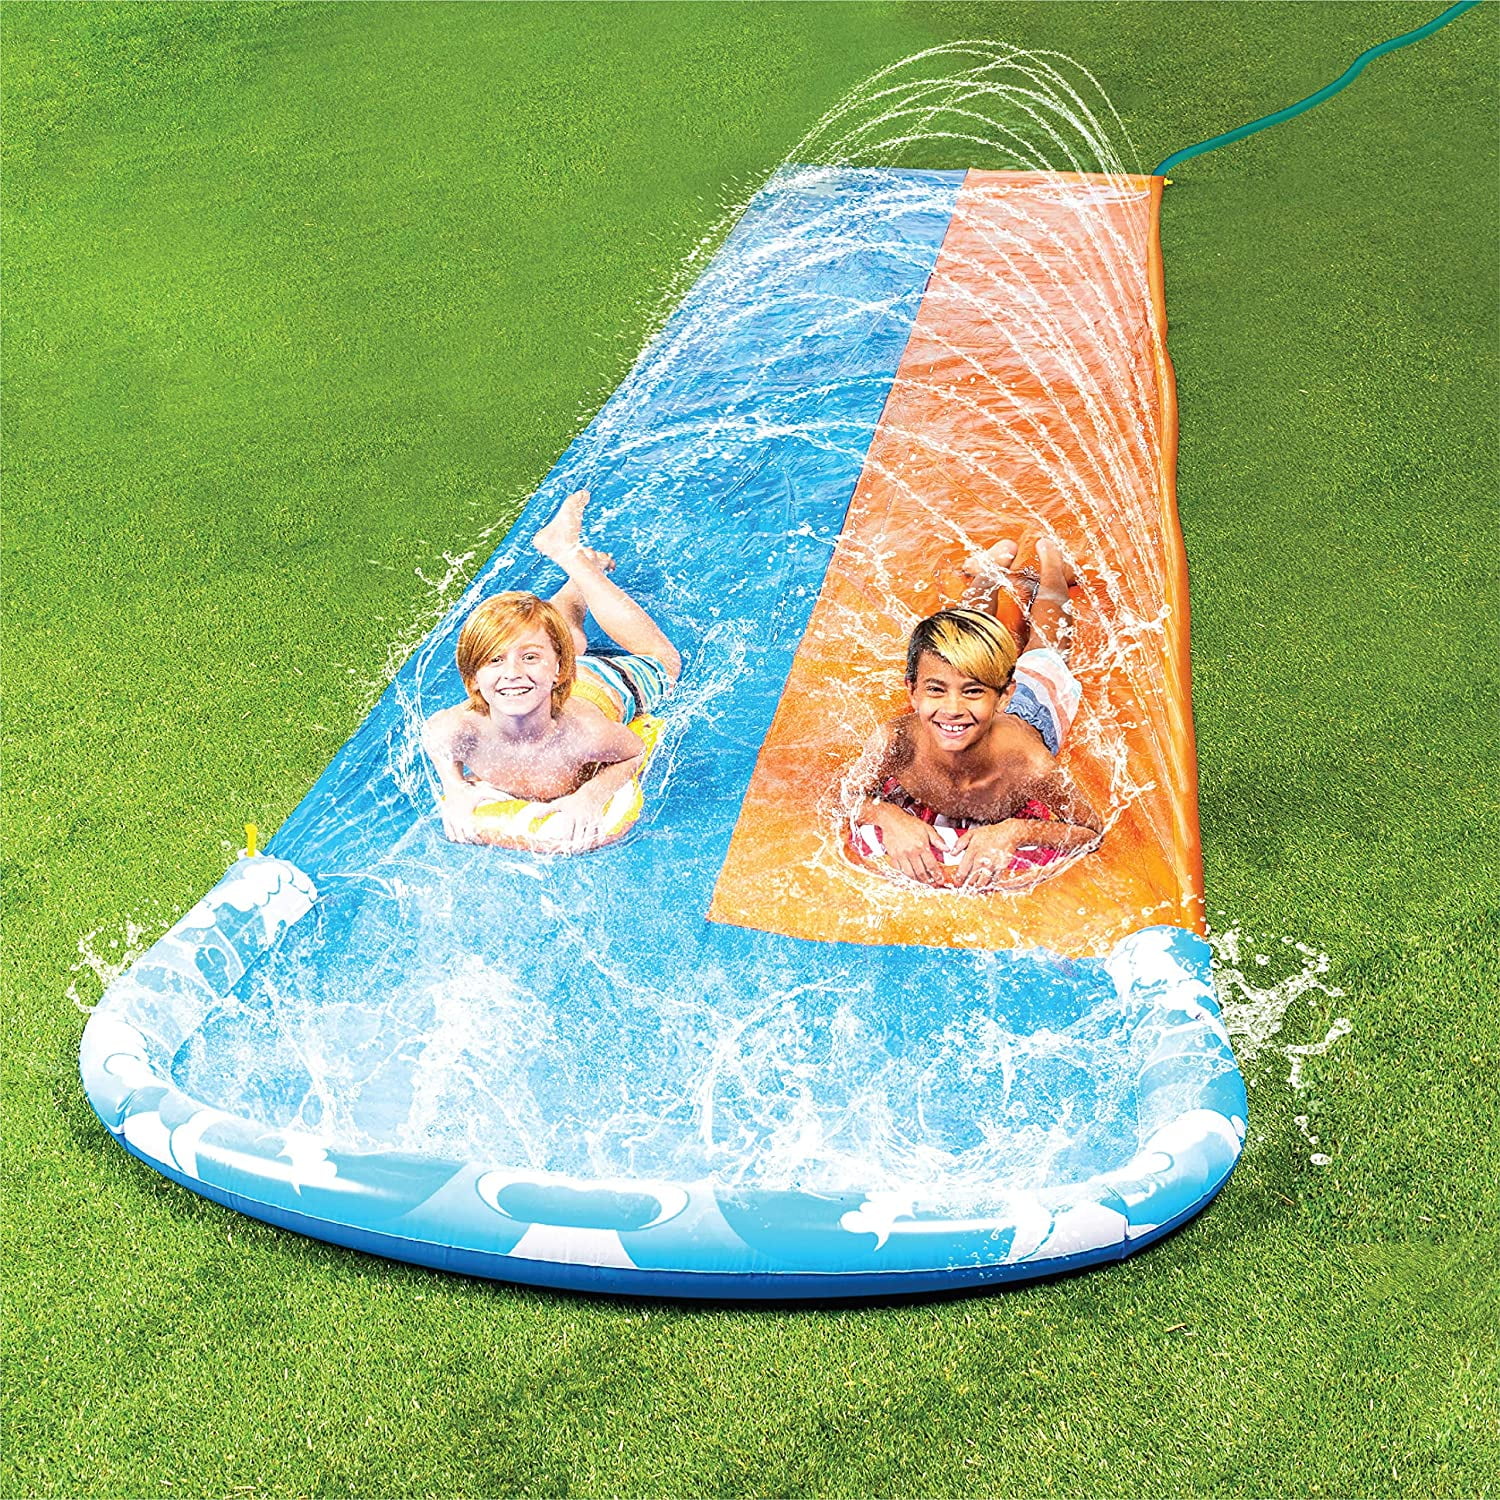 Spring Water Bodyboard for Slip Water Slide Slip Lawn Water Slide Bodyboard Made of Thicker and More Durable PVC 